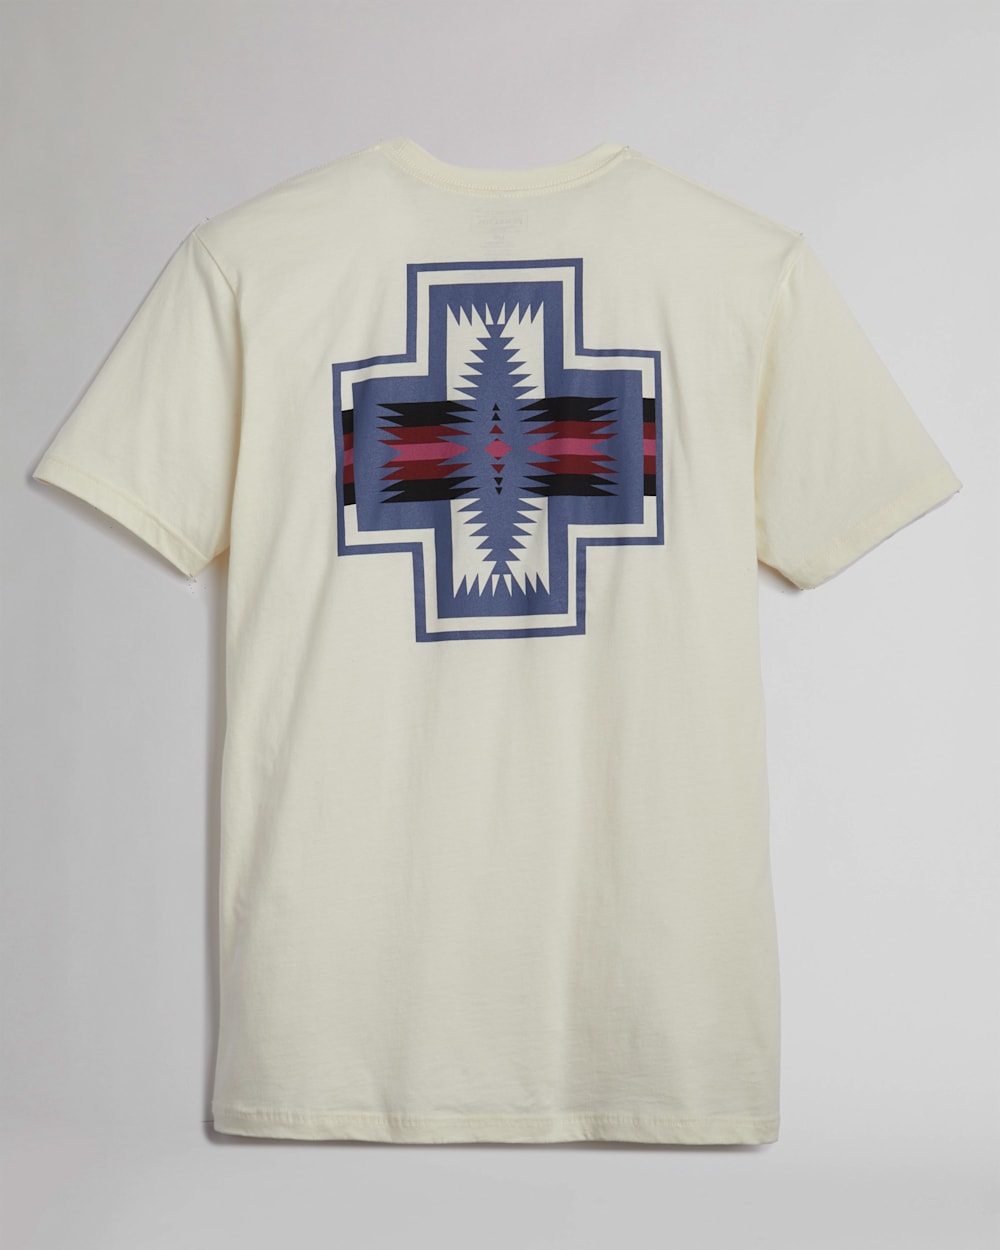 ALTERNATE VIEW OF MEN'S HARDING GRAPHIC TEE IN NATURAL/GREY image number 2